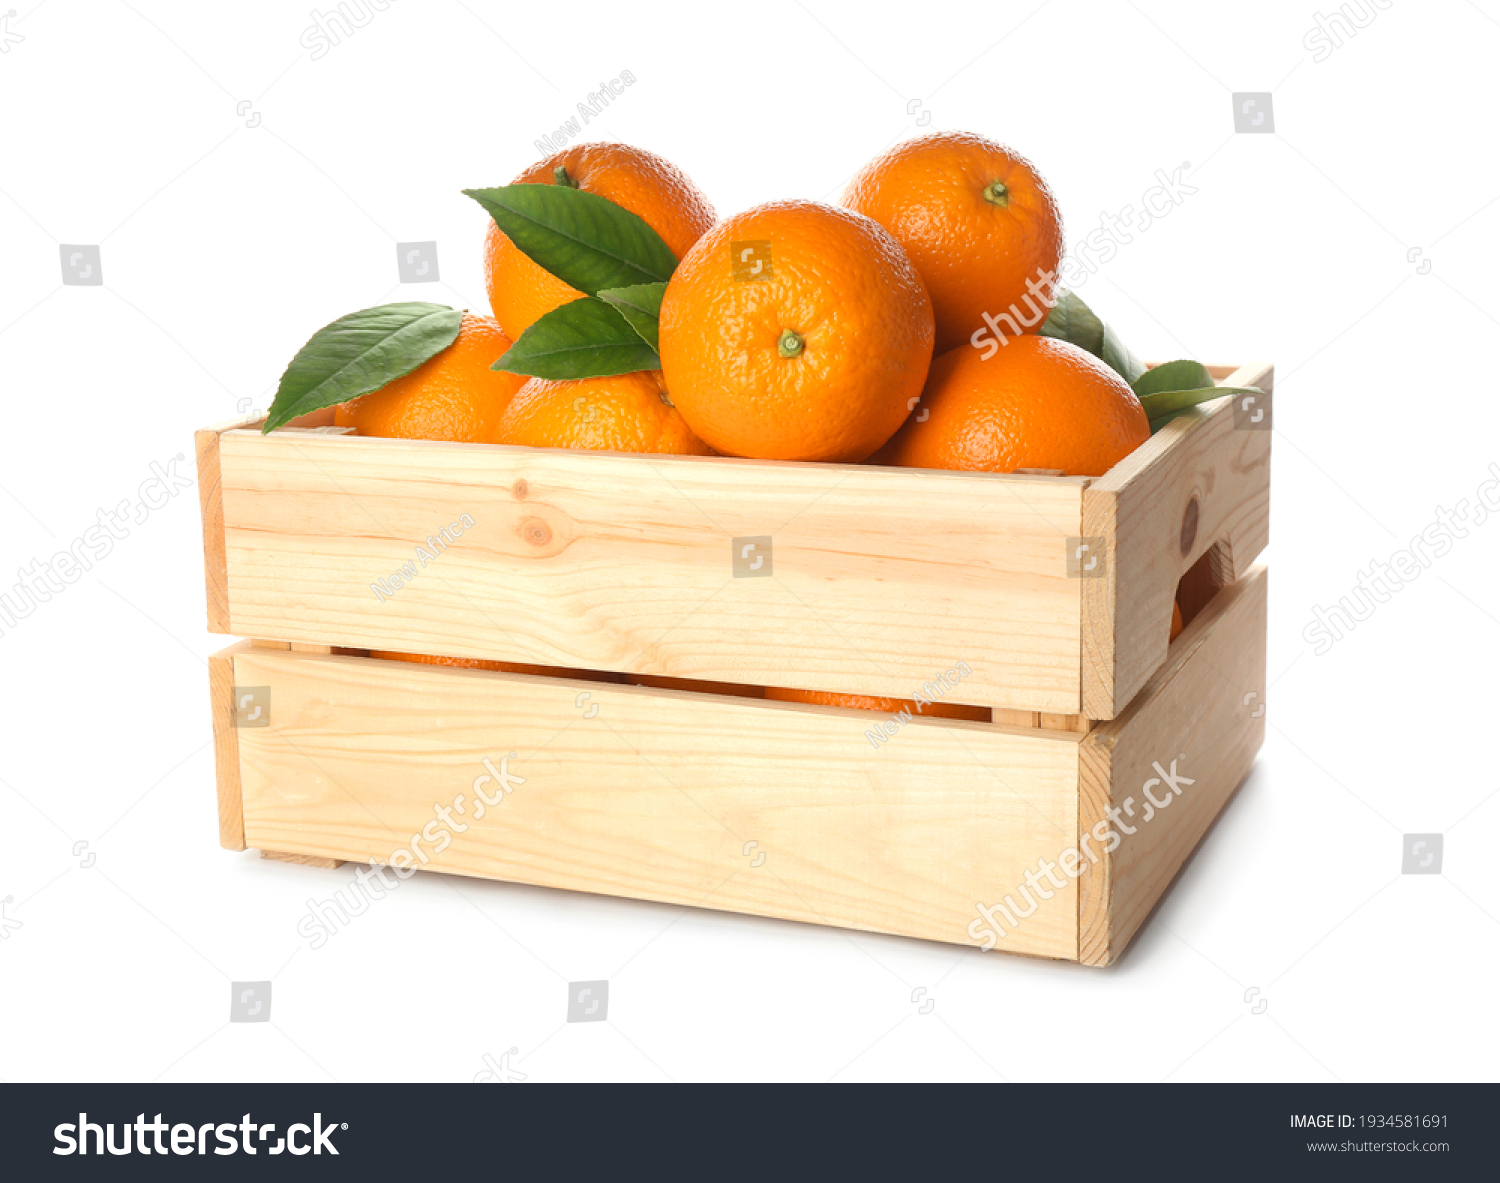 Fresh ripe oranges with green leaves in wooden crate on white background #1934581691